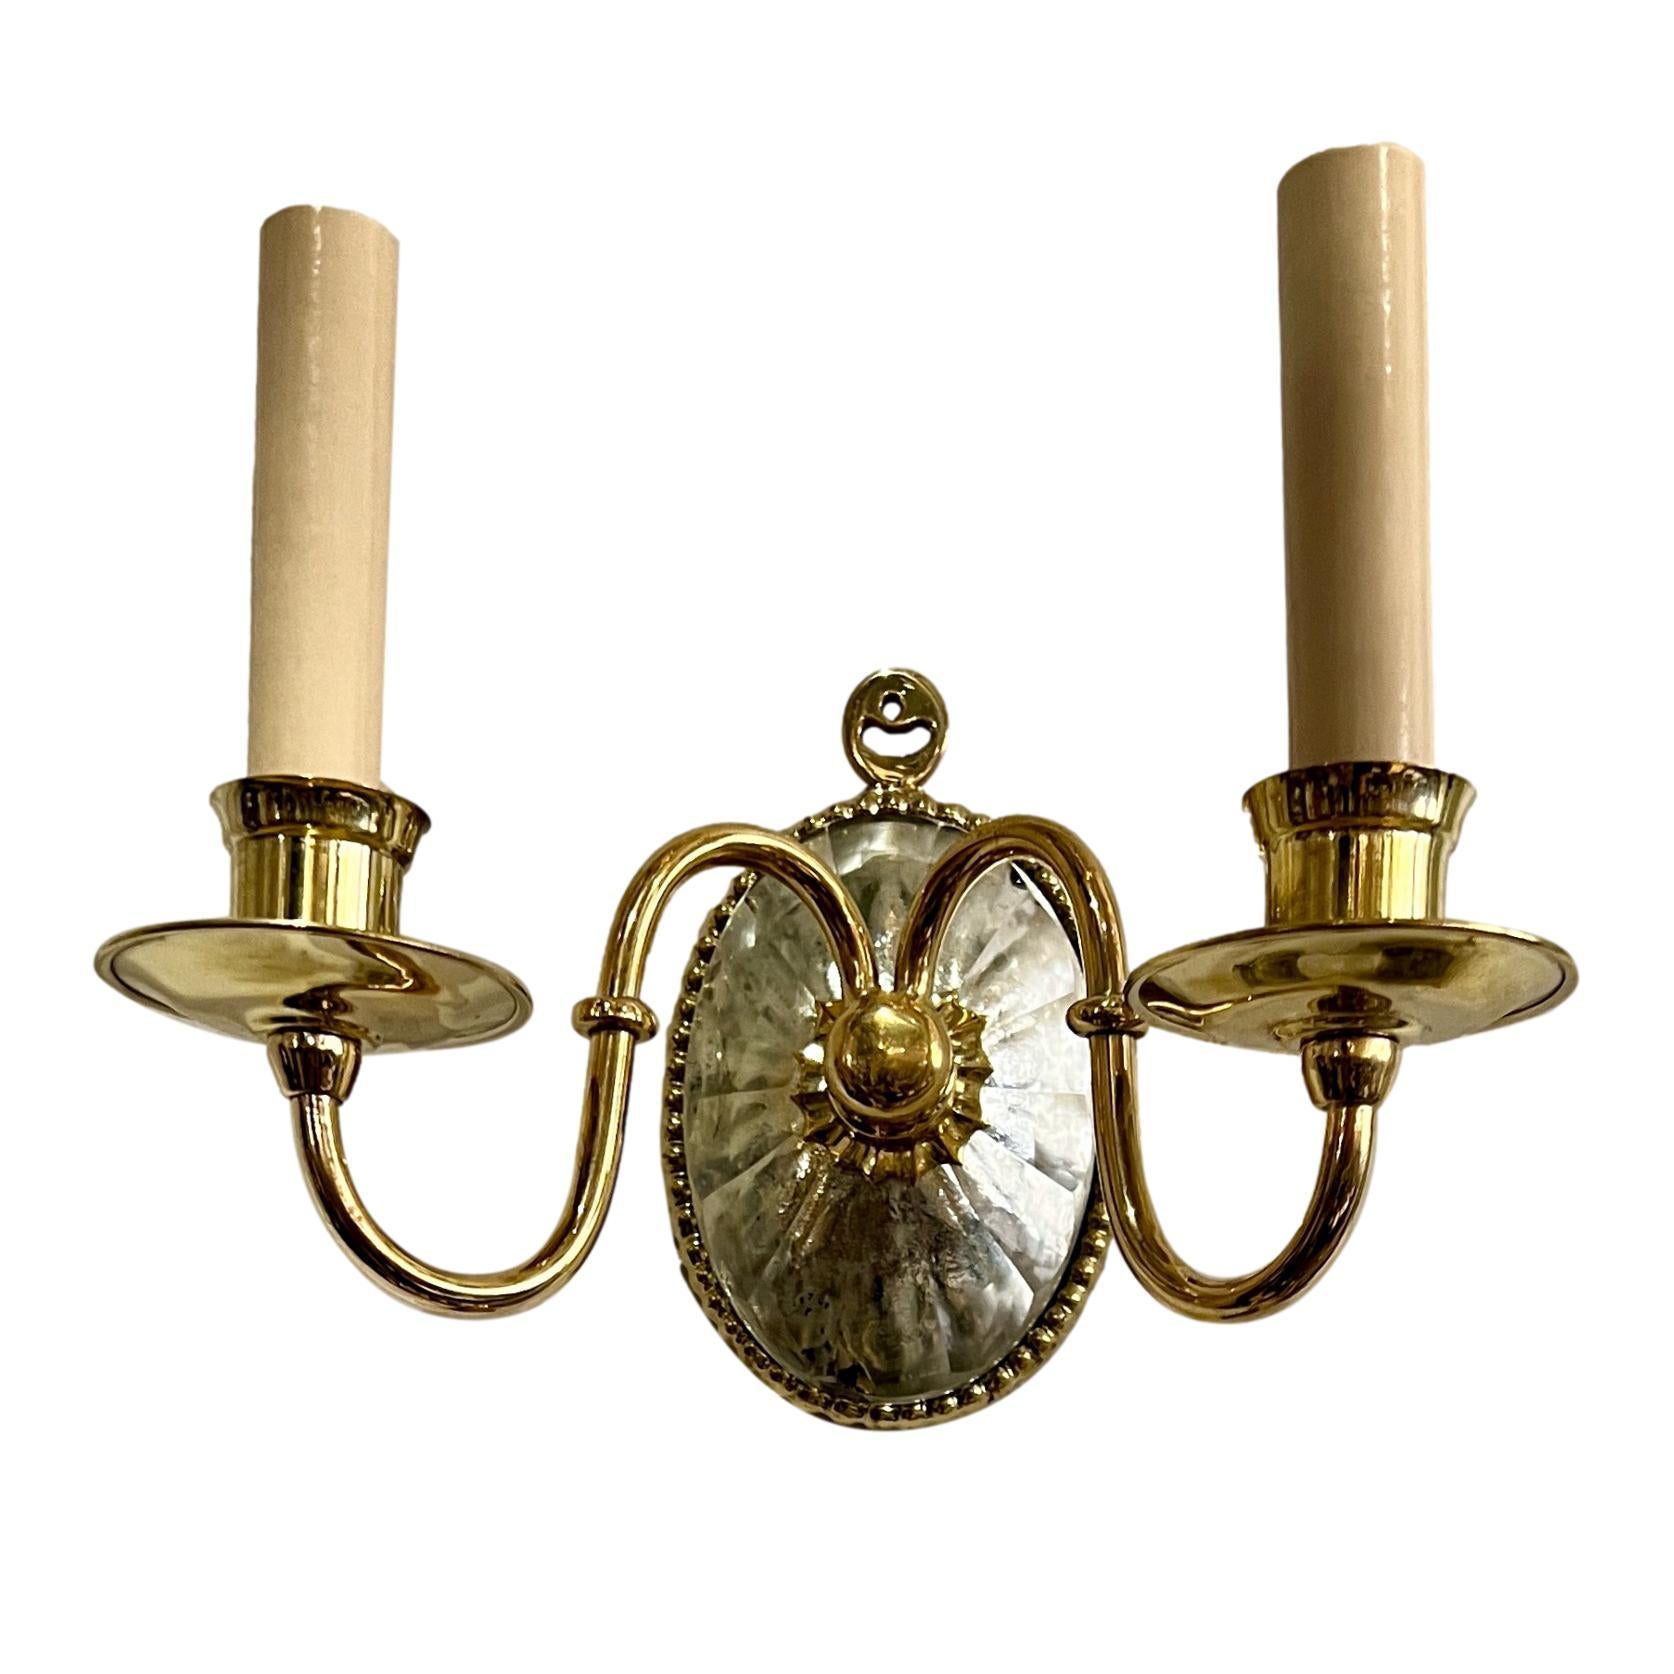 Set of four circa 1940’s English polished bronze double light sconces with original finish and molded glass backplate. Sold per pair.

Measurements:
Height: 7?
Width: 9.5